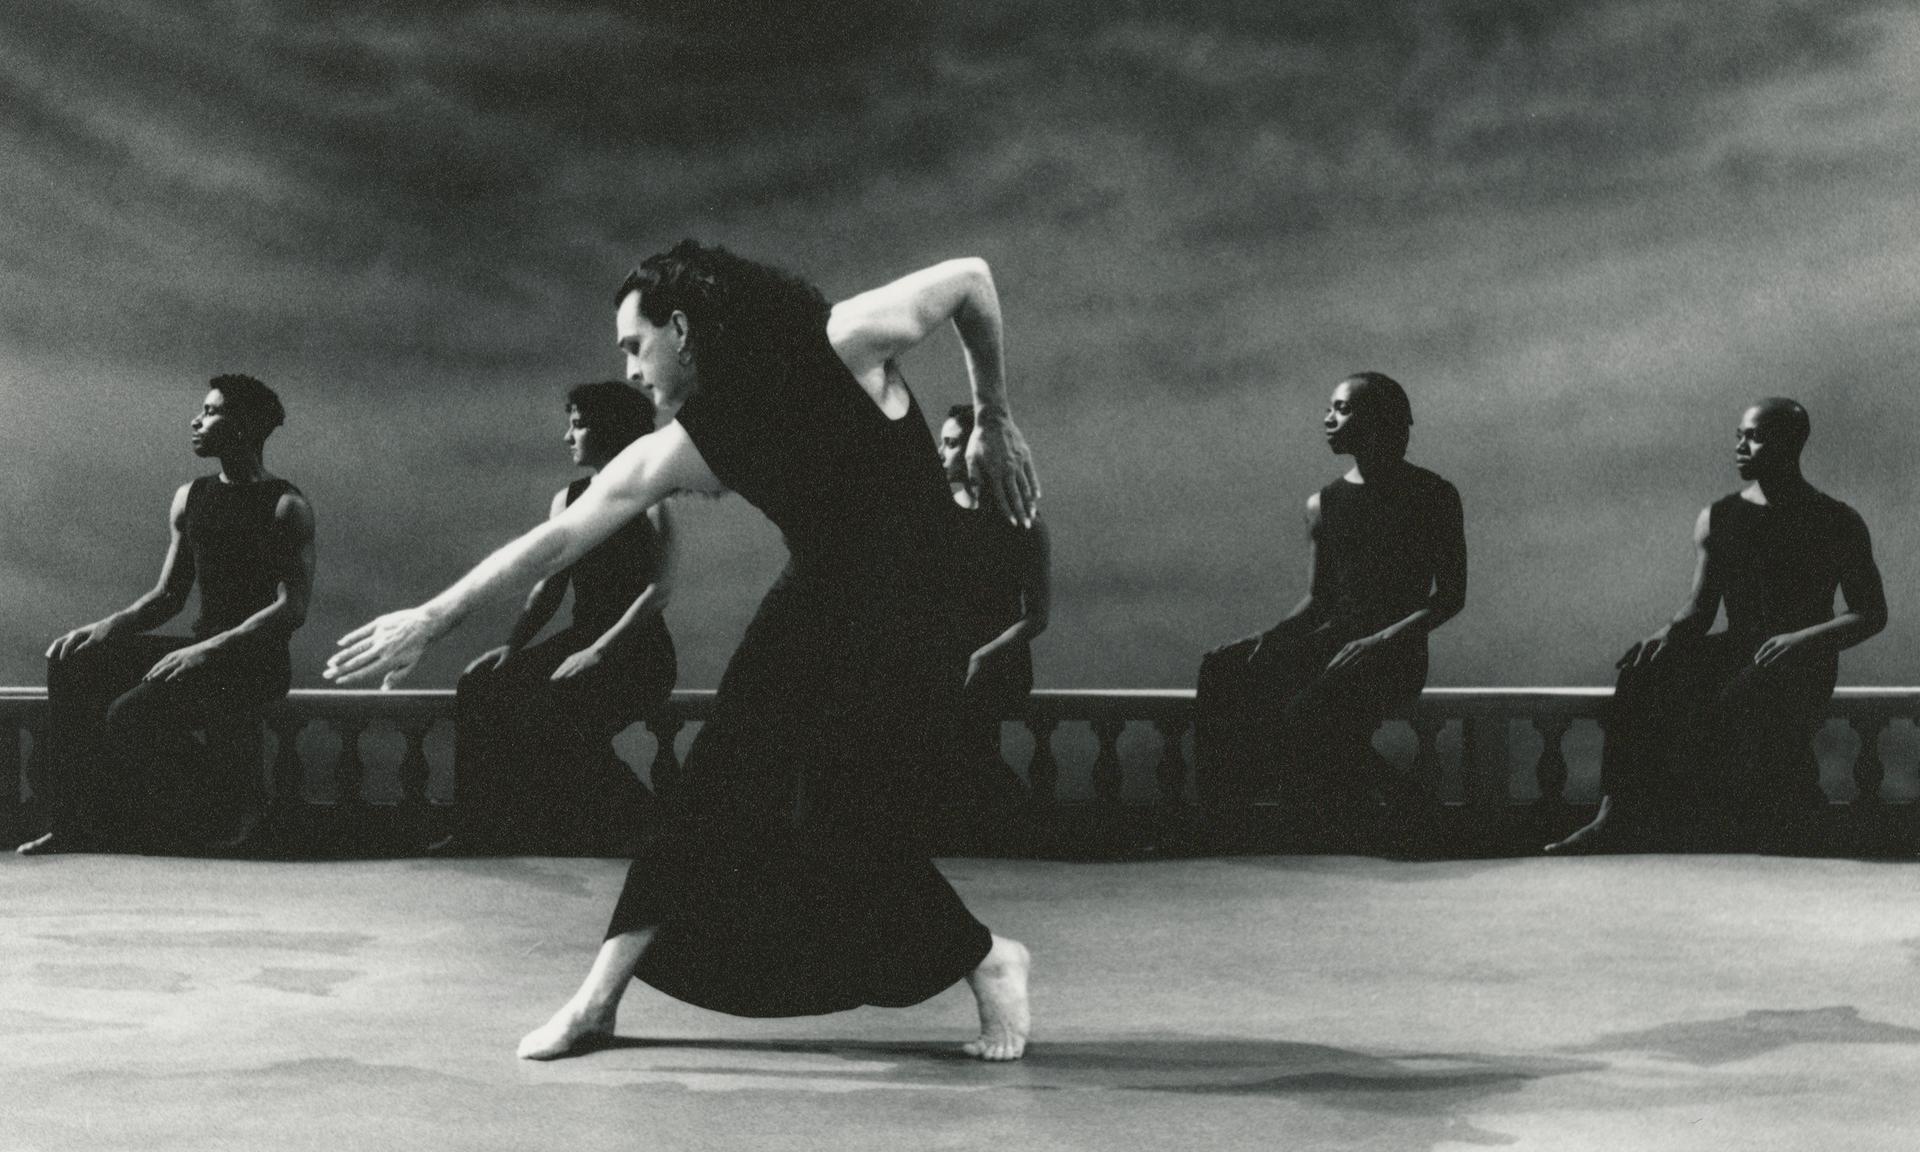 Mark Morris dancing in the “Dido and Aeneas” film shoot, Toronto, 1996.